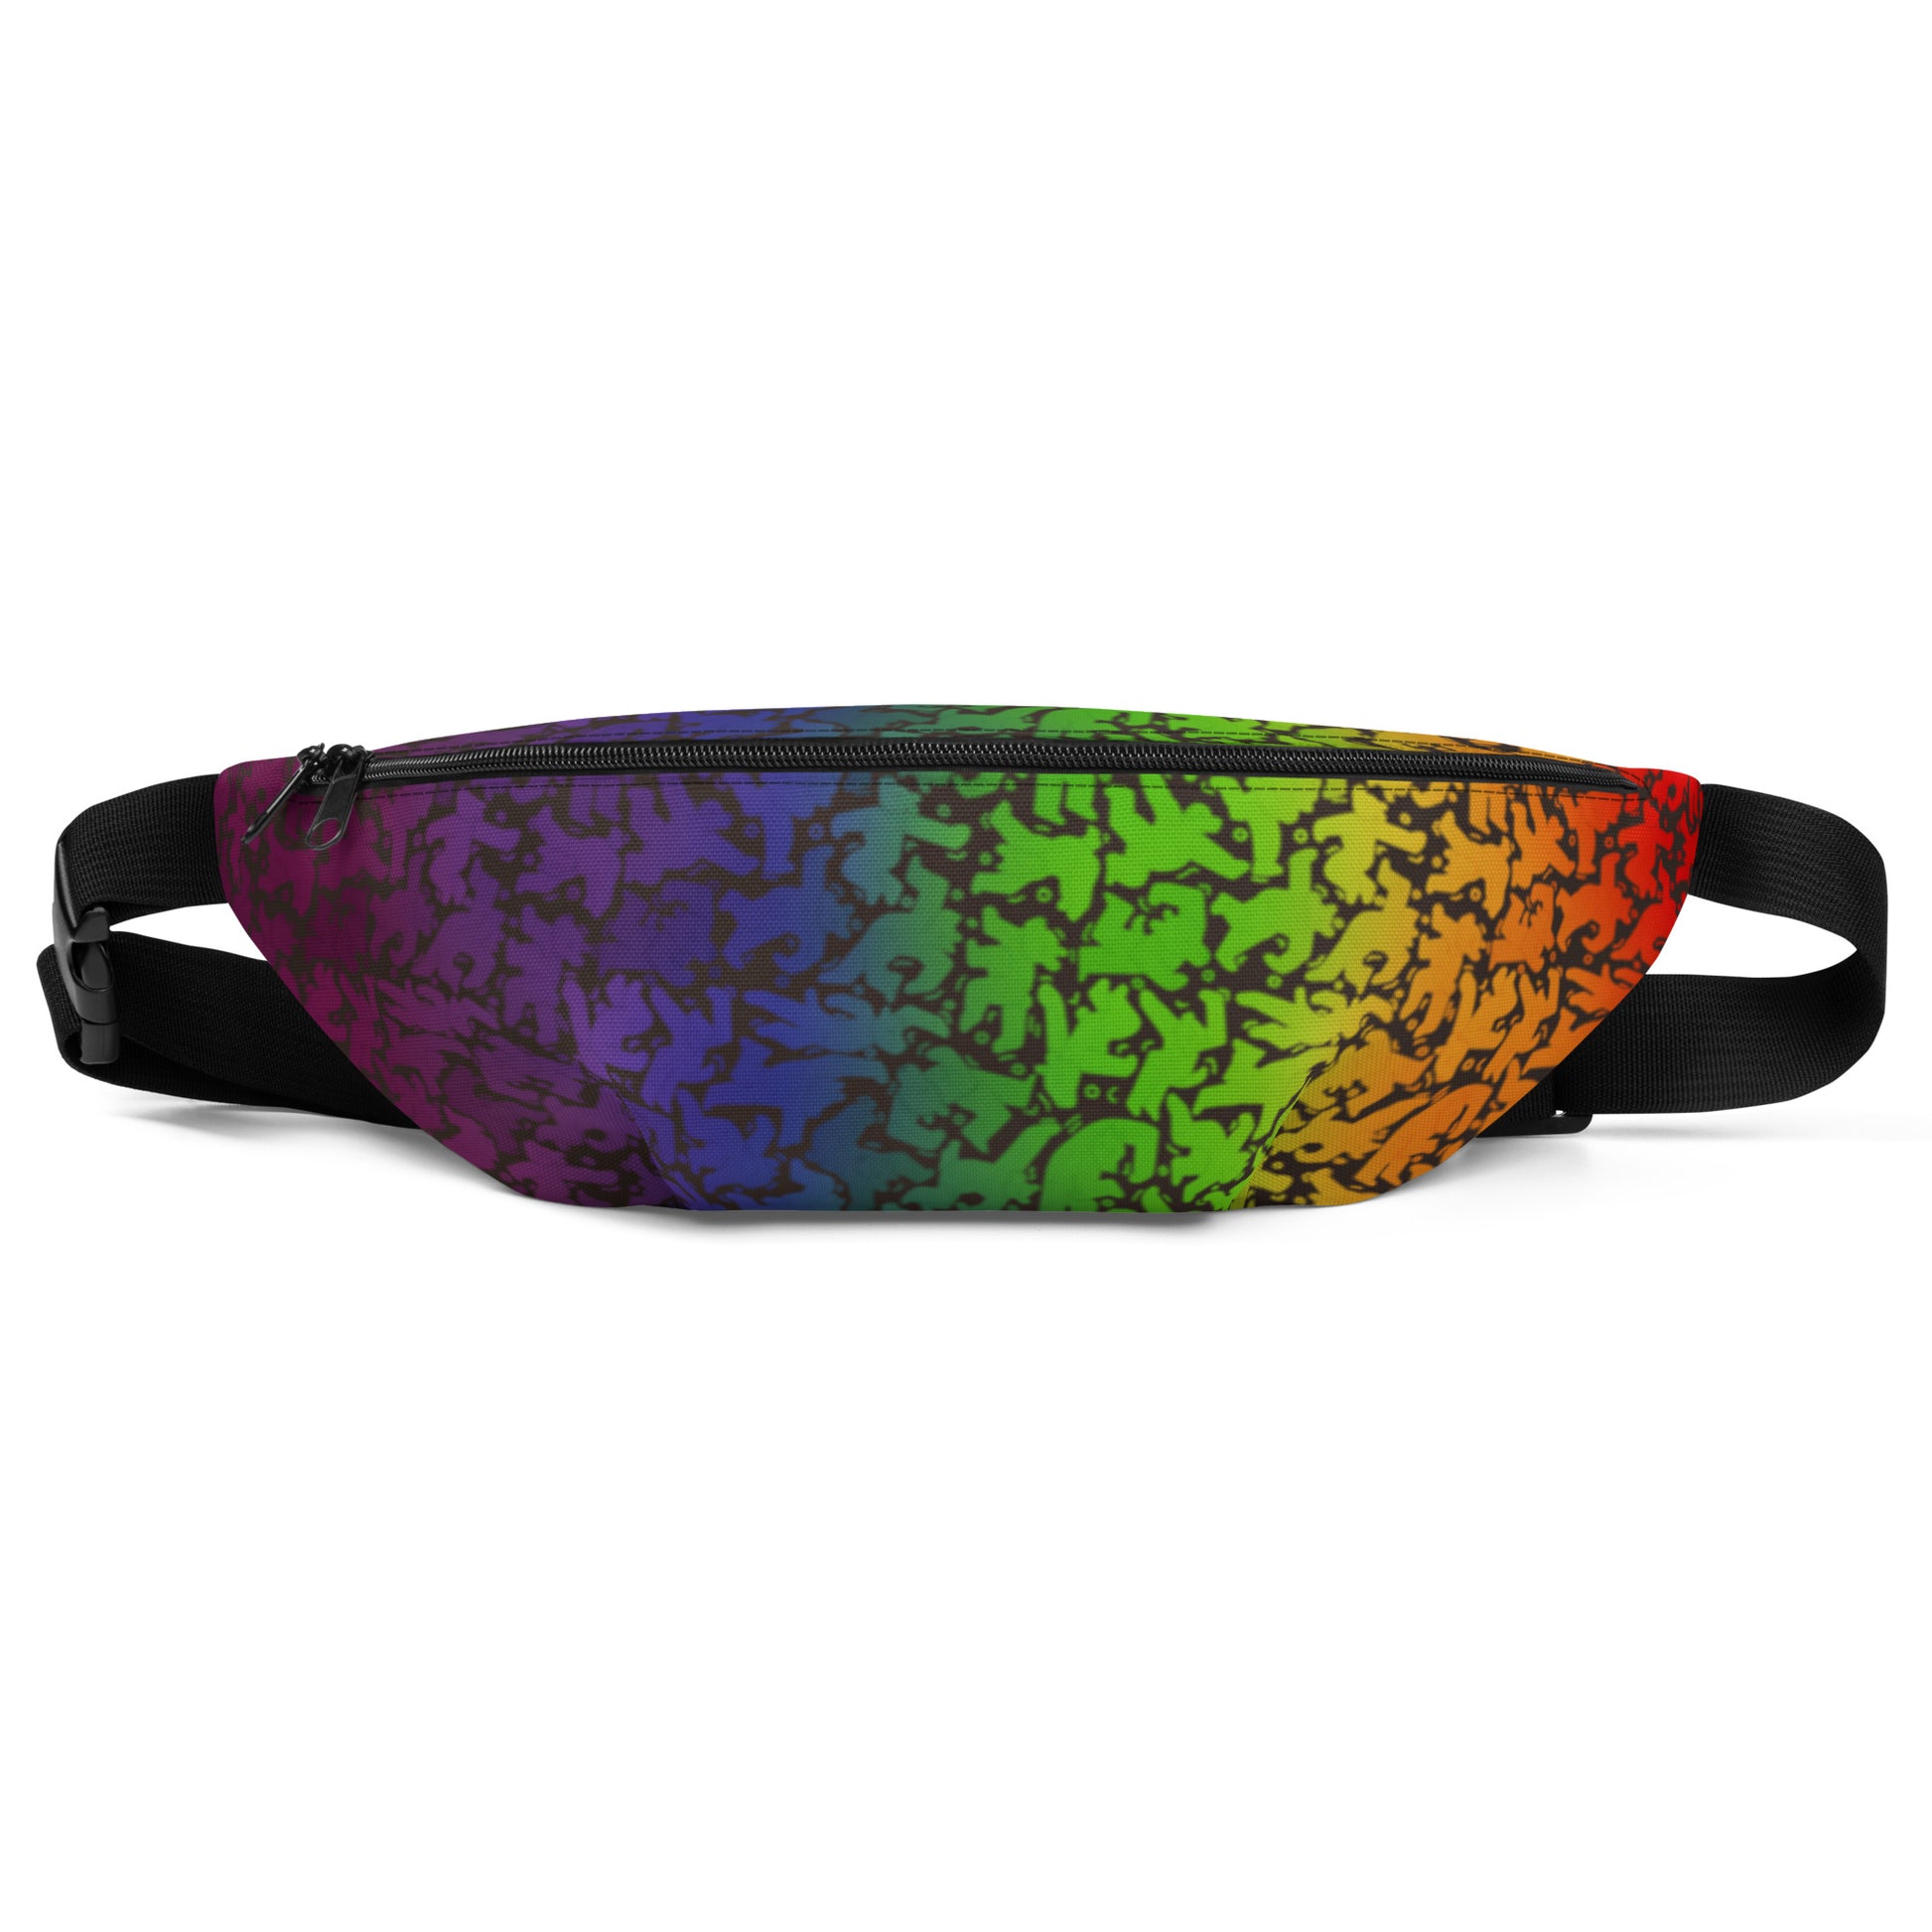 All over print fanny pack featuring rainbow bear pattern in style of Keith Haring front view